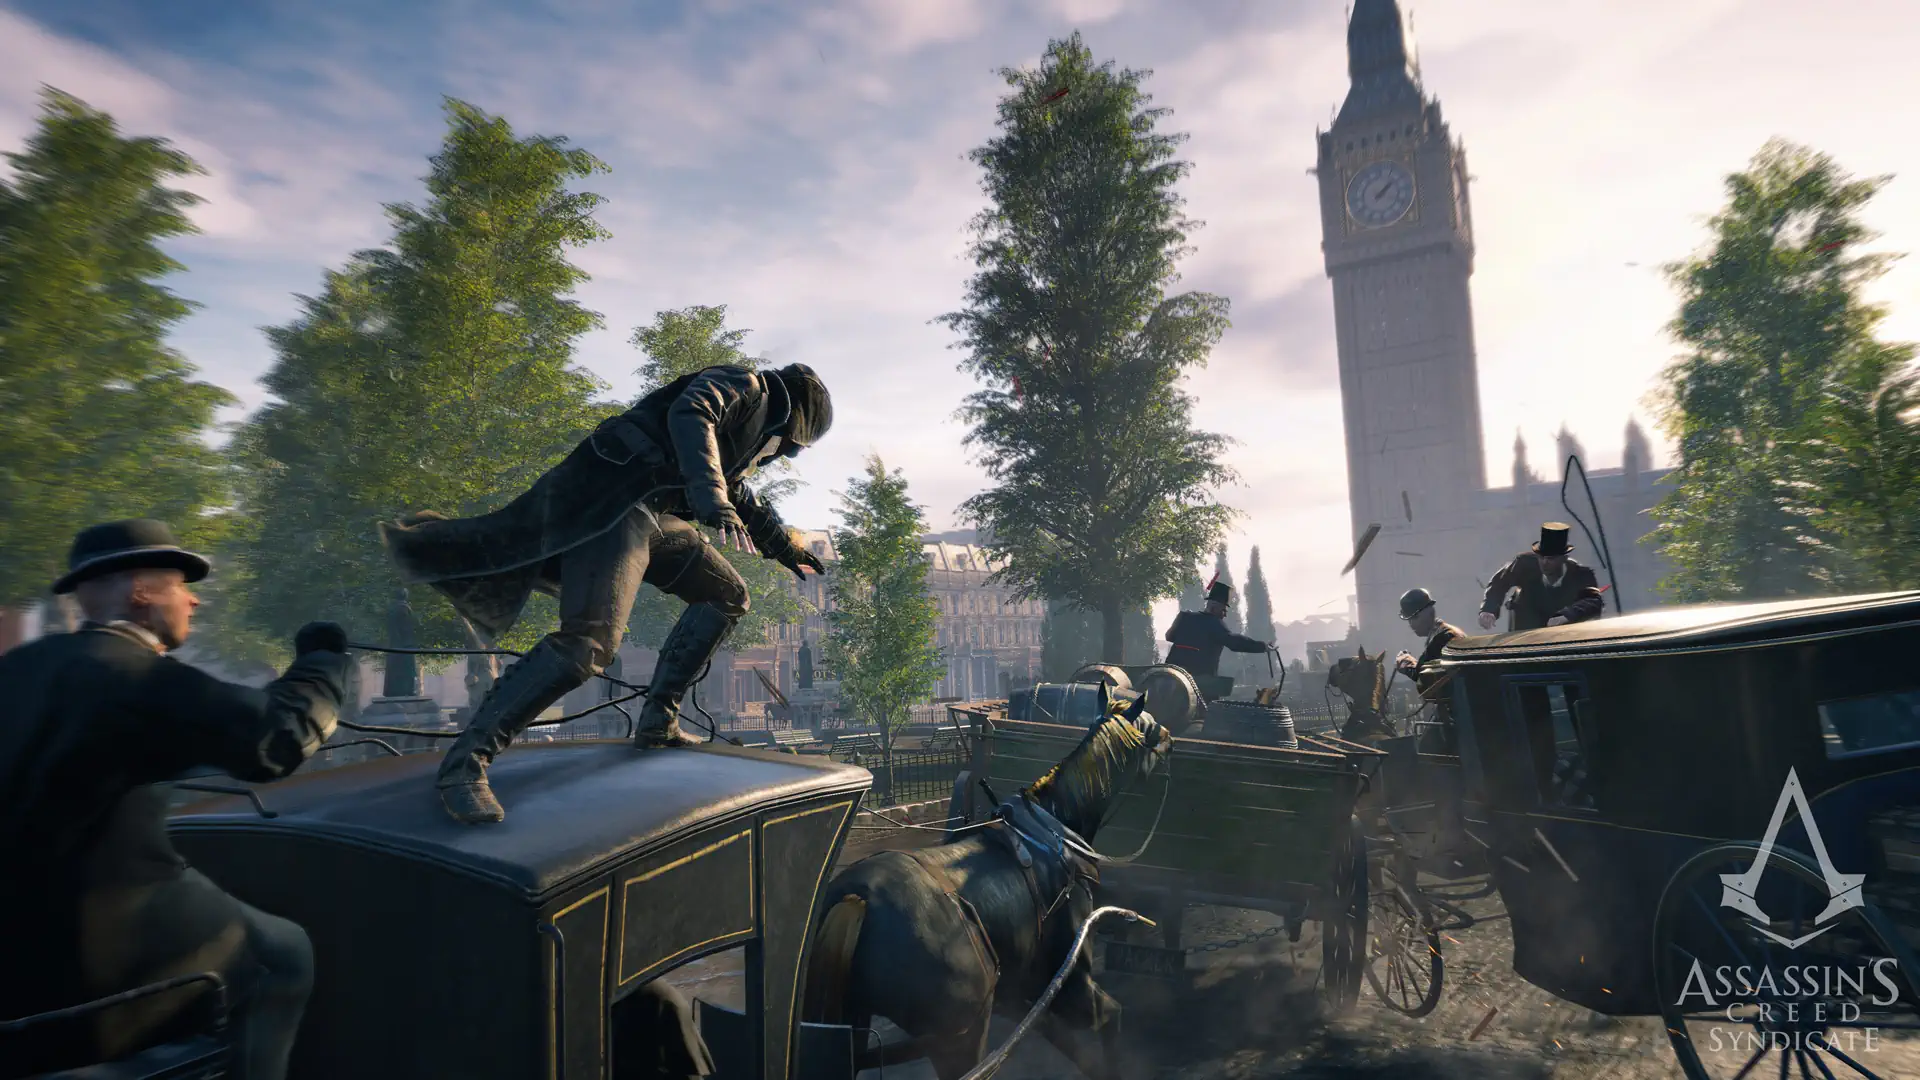 Assassins-Creed-Syndicate-2.webp